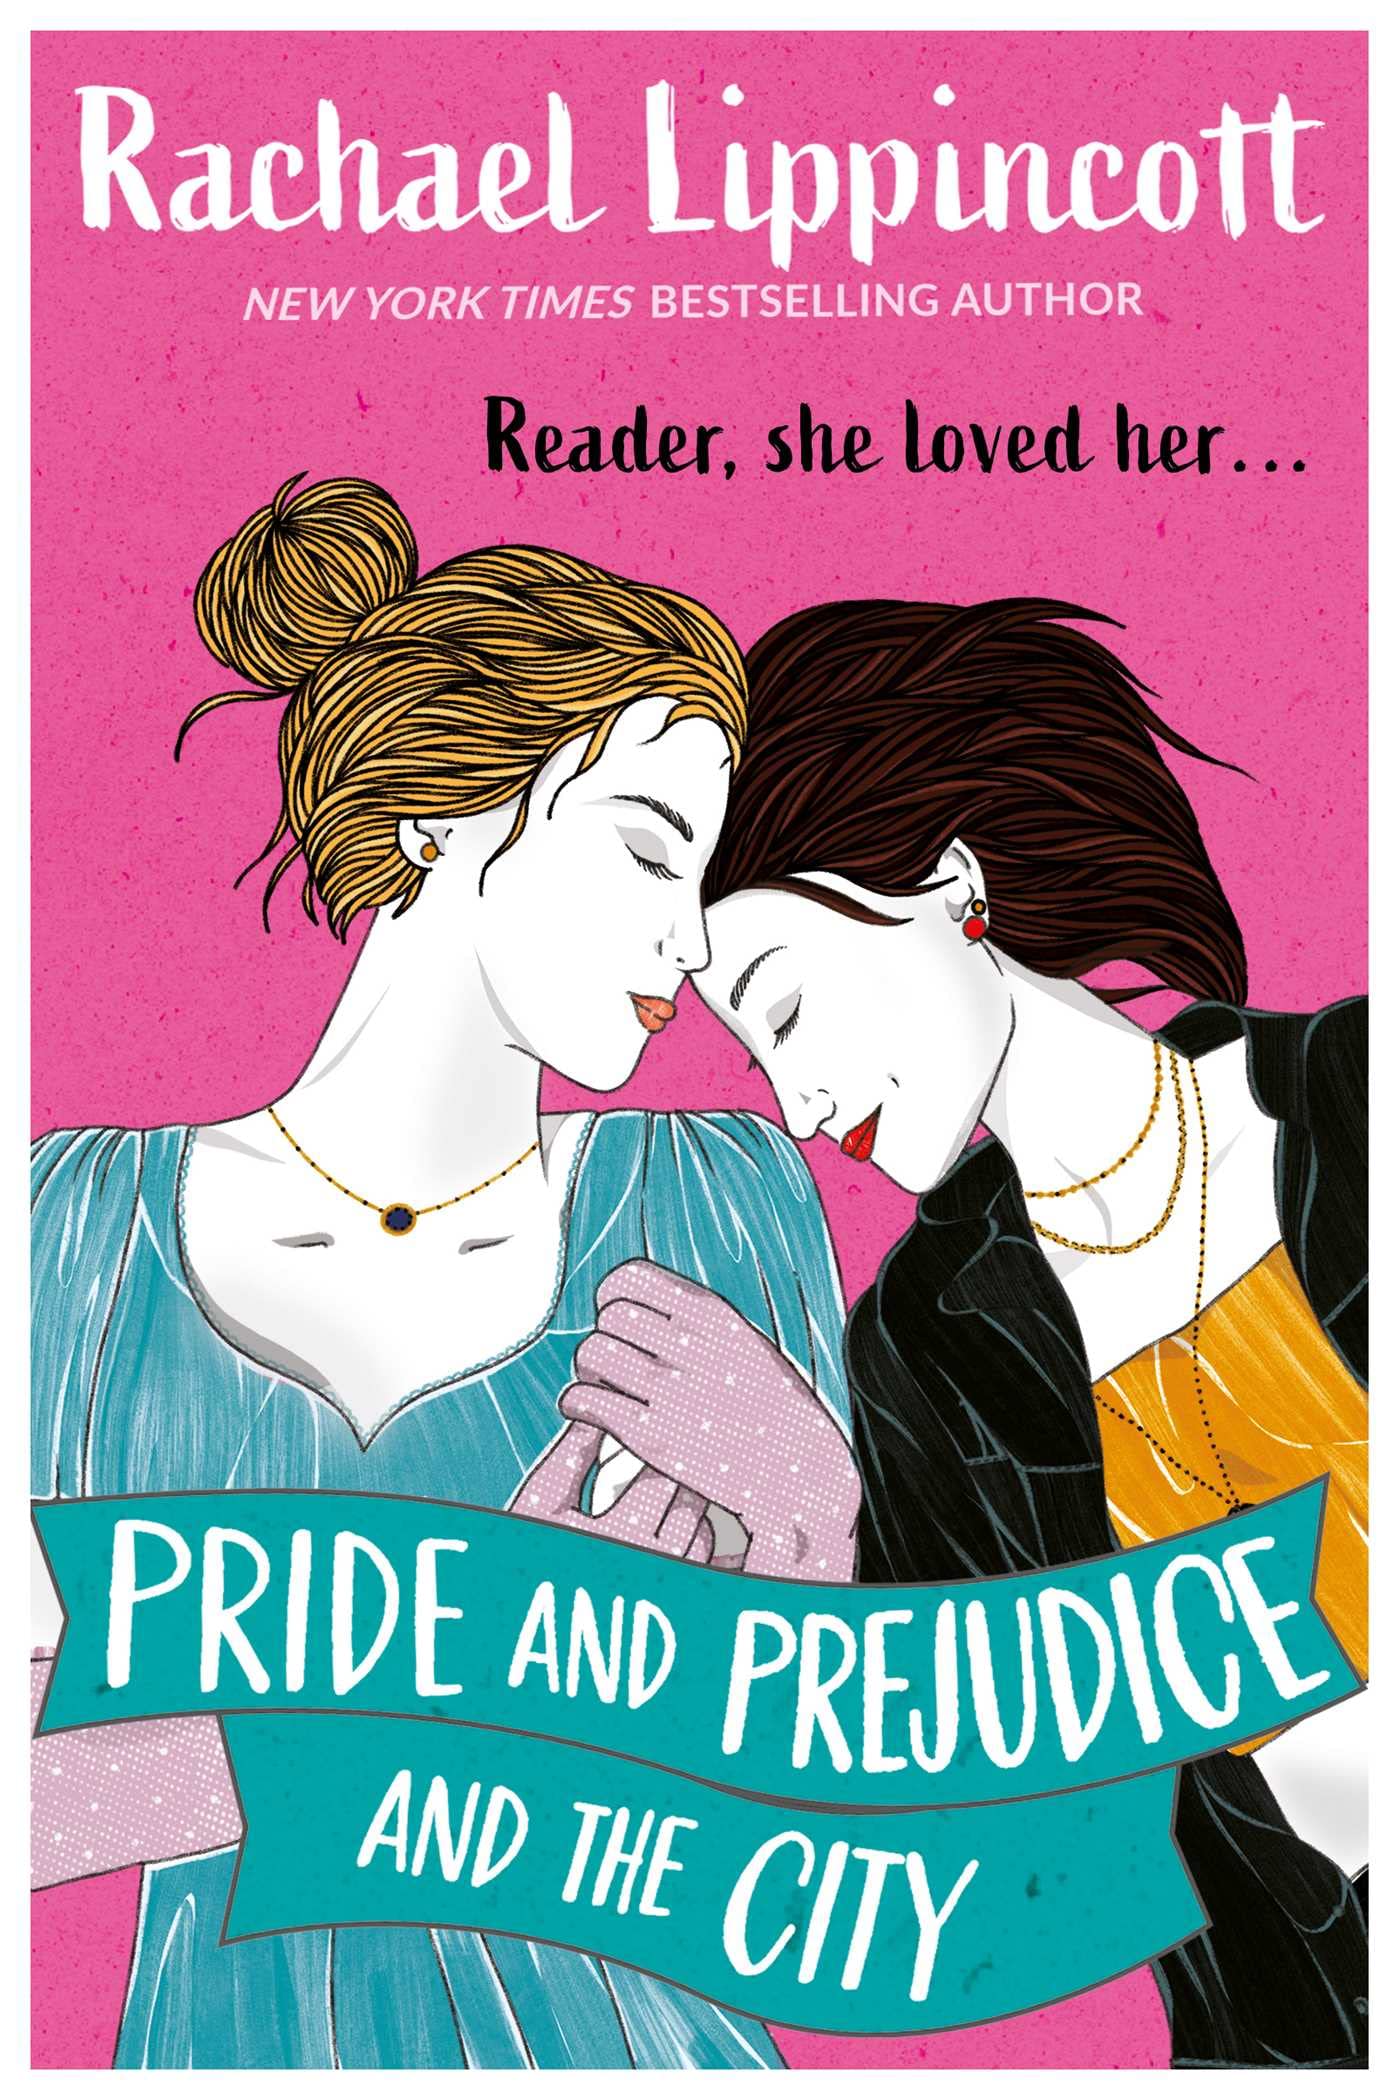 Pride and Prejudice and the City | Rachael Lippincott